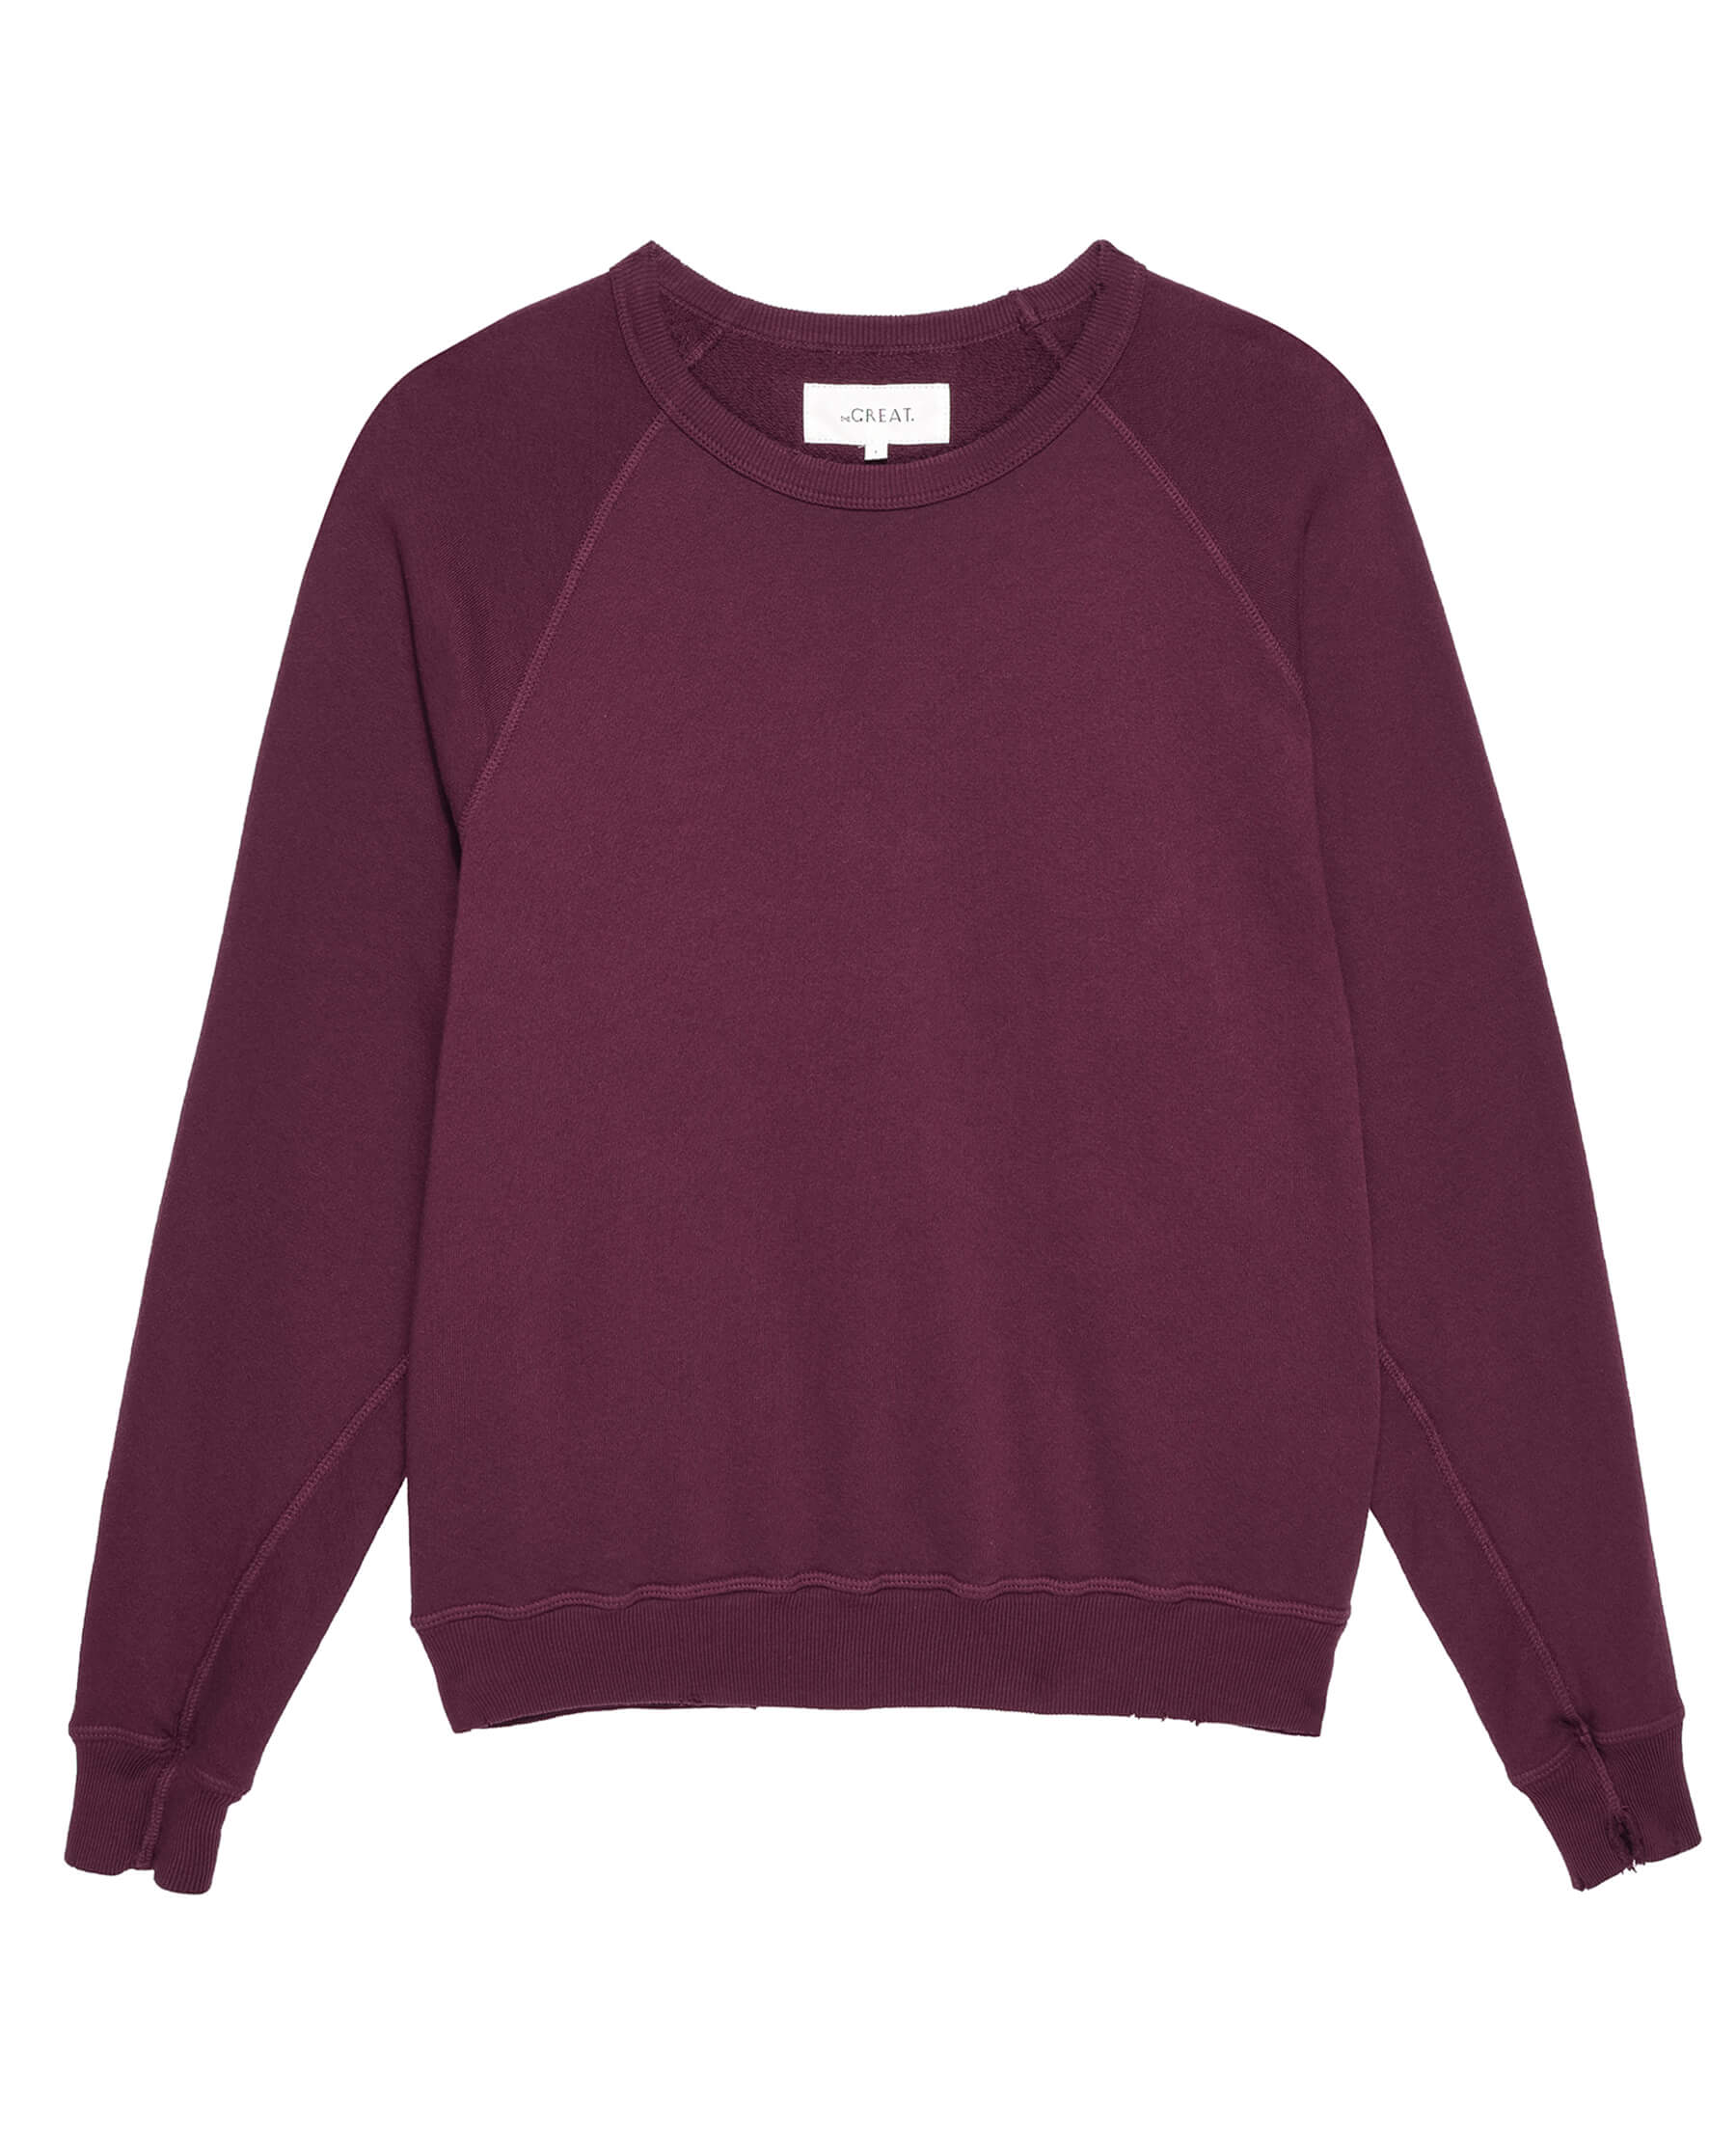 The College Sweatshirt. Solid -- Mulled Wine SWEATSHIRTS THE GREAT. HOL 23 KNITS